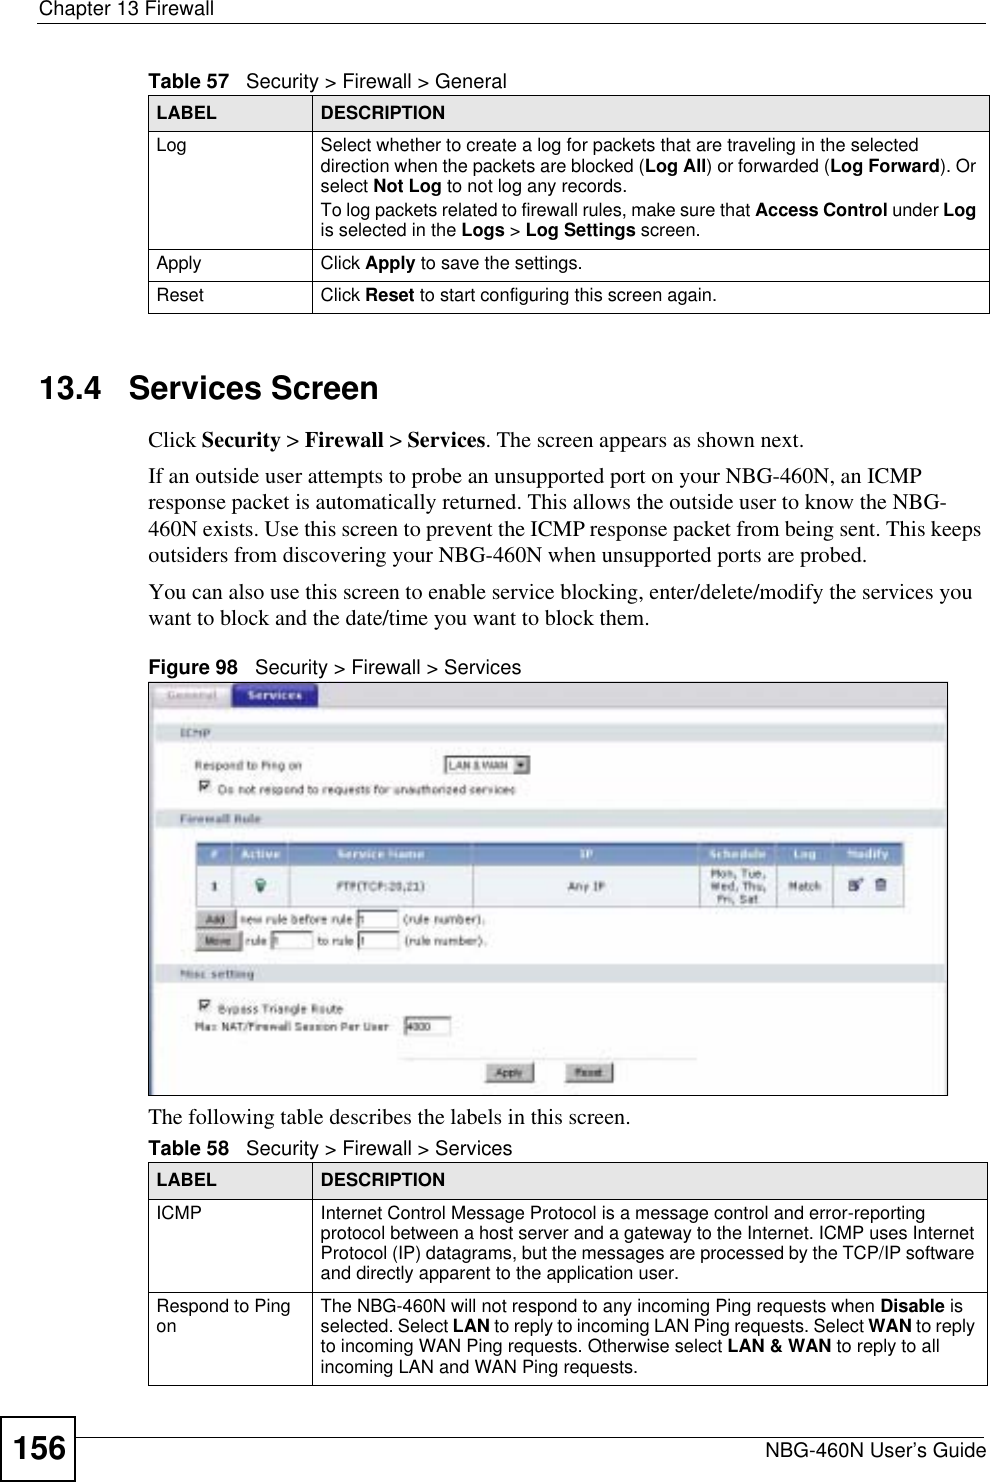 Chapter 13 FirewallNBG-460N User’s Guide15613.4   Services ScreenClick Security &gt; Firewall &gt; Services. The screen appears as shown next. If an outside user attempts to probe an unsupported port on your NBG-460N, an ICMP response packet is automatically returned. This allows the outside user to know the NBG-460N exists. Use this screen to prevent the ICMP response packet from being sent. This keeps outsiders from discovering your NBG-460N when unsupported ports are probed.You can also use this screen to enable service blocking, enter/delete/modify the services you want to block and the date/time you want to block them.Figure 98   Security &gt; Firewall &gt; Services The following table describes the labels in this screen.Log Select whether to create a log for packets that are traveling in the selected direction when the packets are blocked (Log All) or forwarded (Log Forward). Or select Not Log to not log any records.To log packets related to firewall rules, make sure that Access Control under Logis selected in the Logs &gt; Log Settings screen. Apply Click Apply to save the settings. Reset Click Reset to start configuring this screen again. Table 57   Security &gt; Firewall &gt; General LABEL DESCRIPTIONTable 58   Security &gt; Firewall &gt; ServicesLABEL DESCRIPTIONICMP Internet Control Message Protocol is a message control and error-reporting protocol between a host server and a gateway to the Internet. ICMP uses Internet Protocol (IP) datagrams, but the messages are processed by the TCP/IP software and directly apparent to the application user. Respond to Ping on The NBG-460N will not respond to any incoming Ping requests when Disable isselected. Select LAN to reply to incoming LAN Ping requests. Select WAN to reply to incoming WAN Ping requests. Otherwise select LAN &amp; WAN to reply to all incoming LAN and WAN Ping requests. 